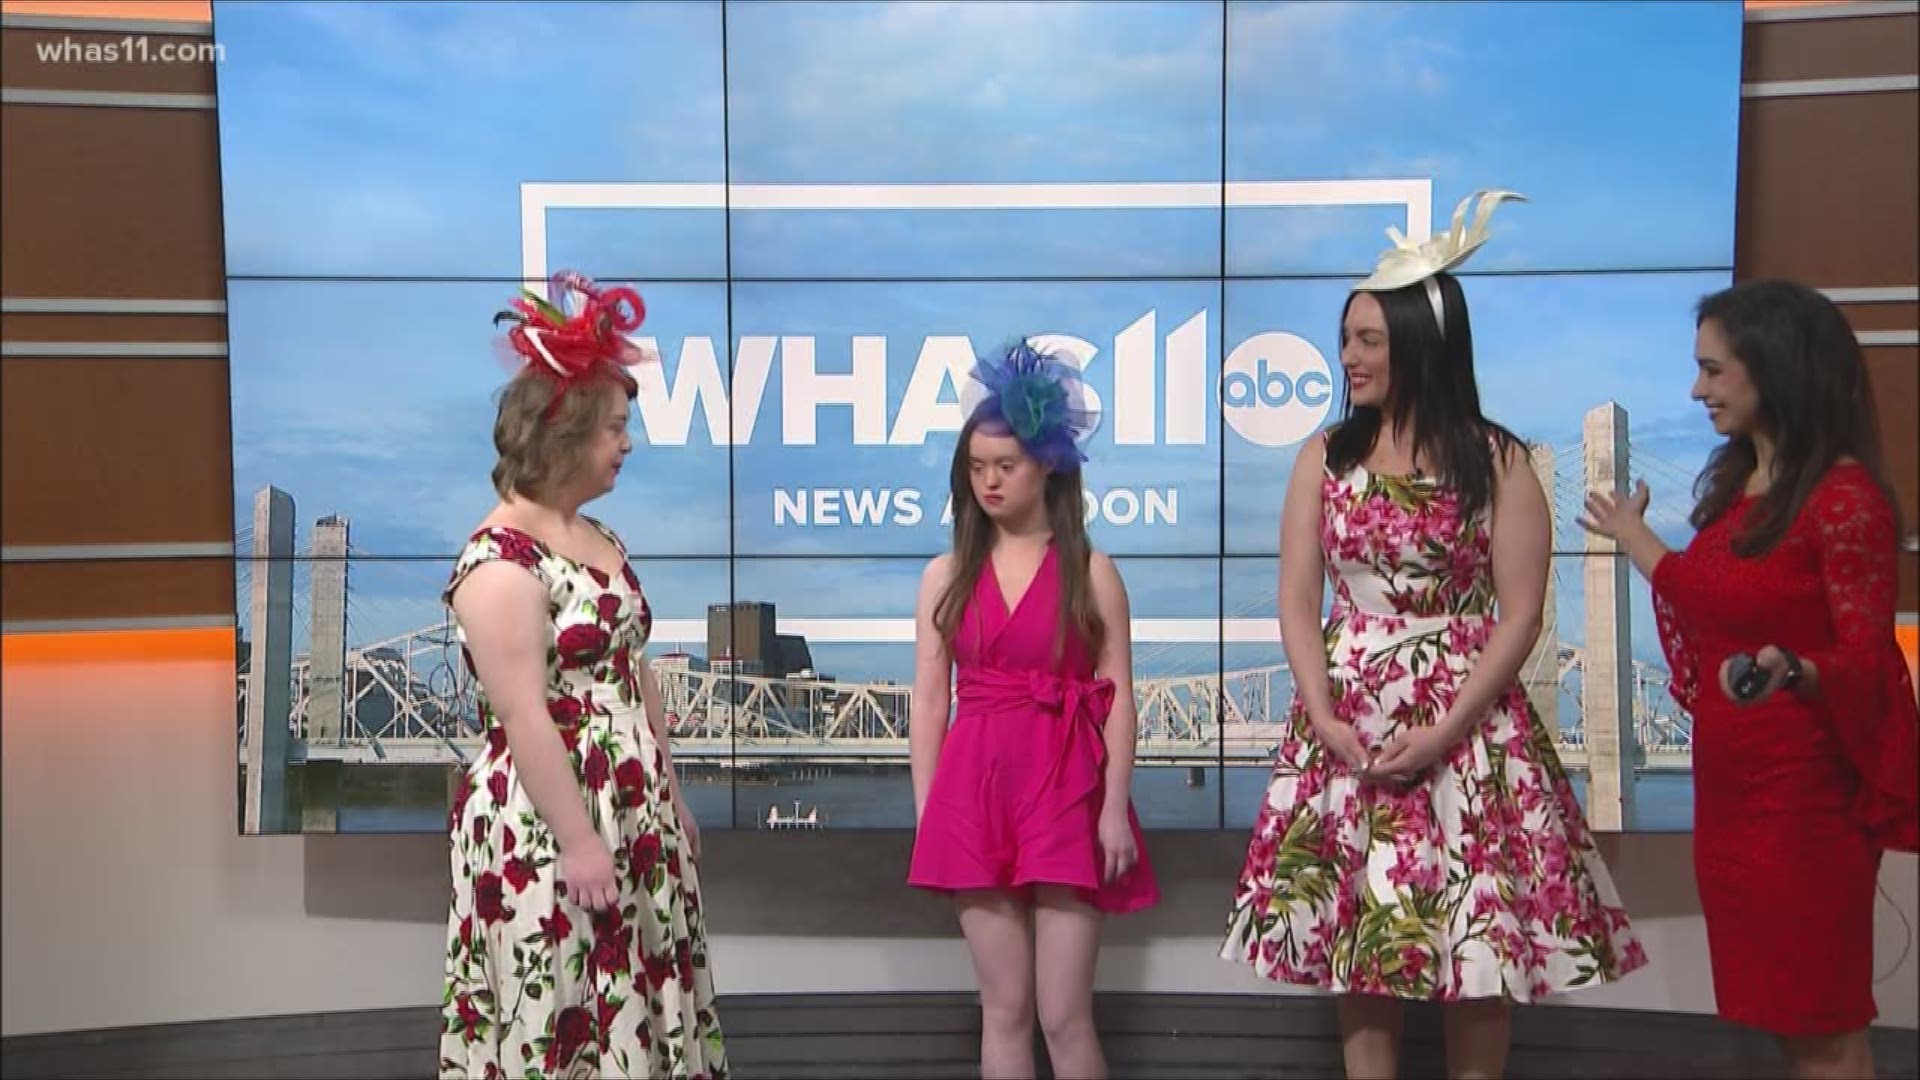 Nicole Volz, Jill Wright, and madeline Franklin talked about the fashion show that is coming up.